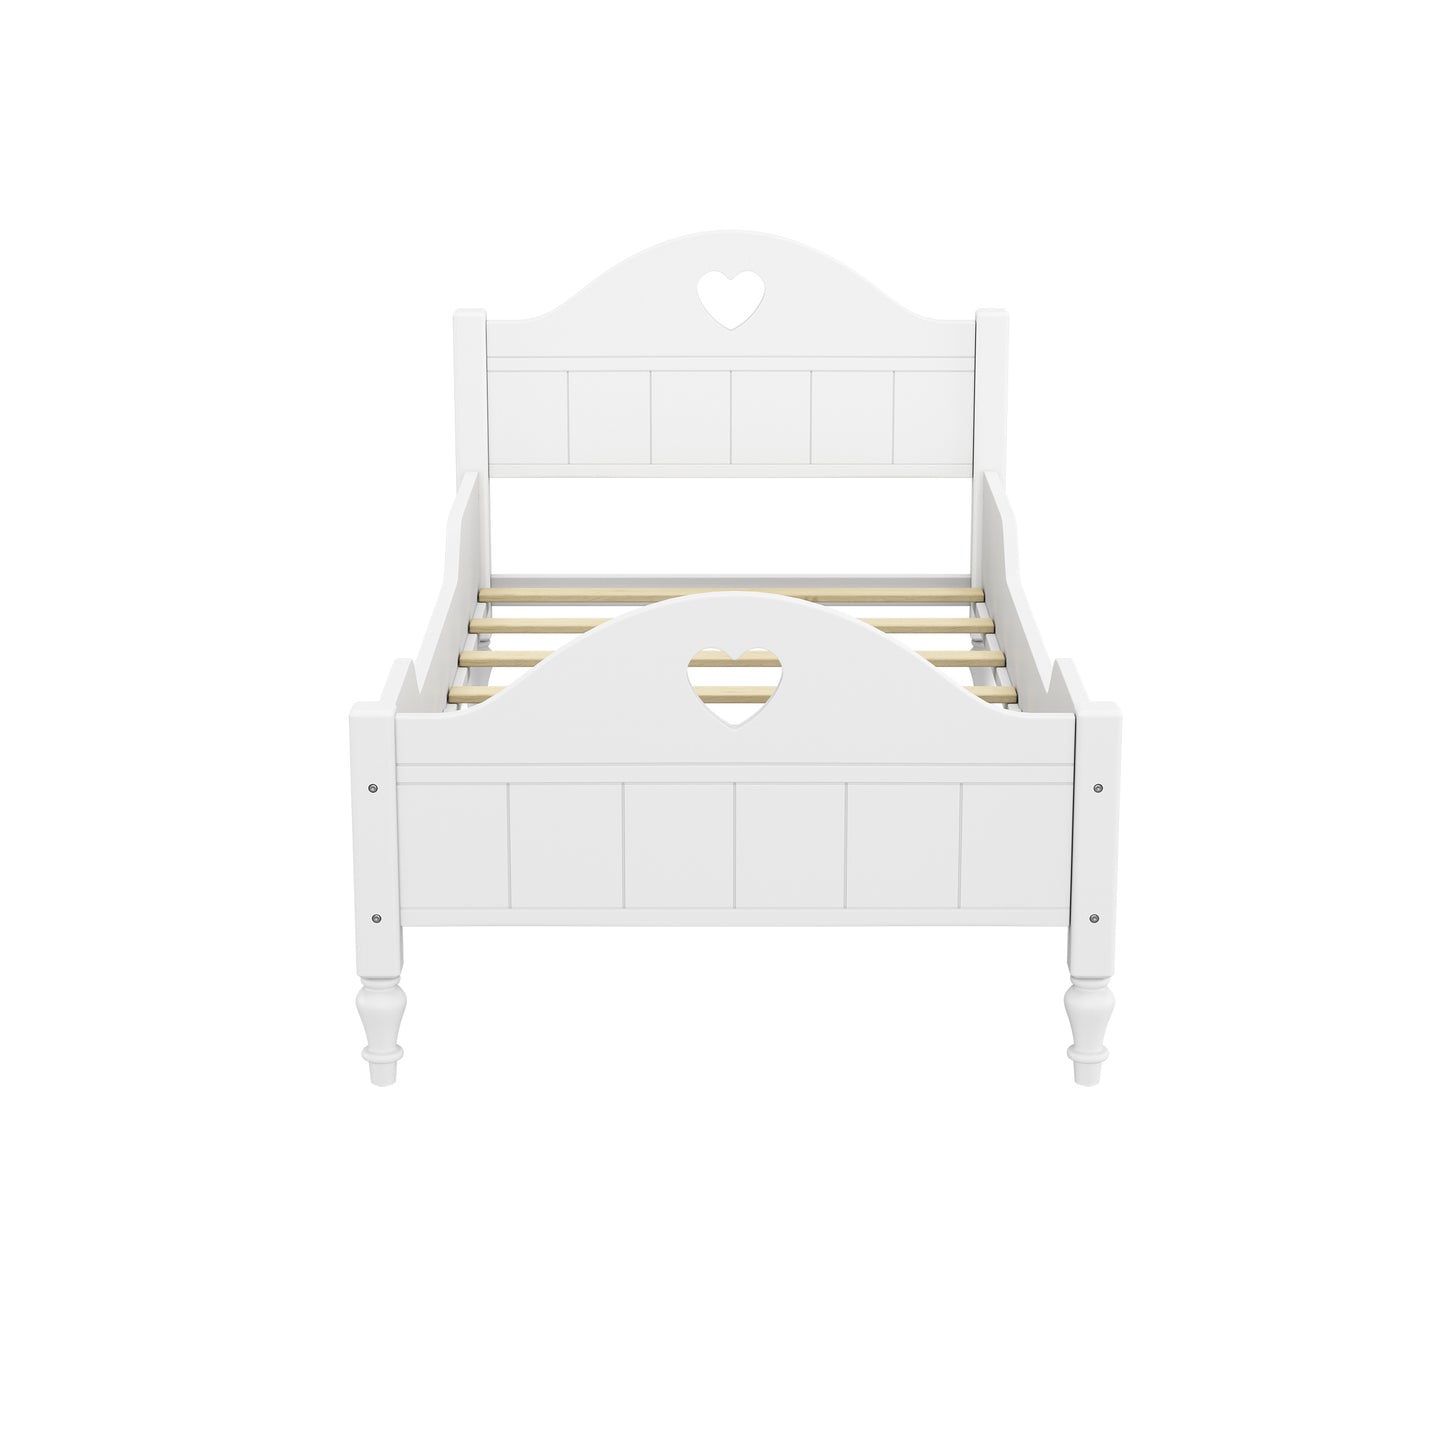 Macaron Twin Size Toddler Bed with Side Safety Rails and Headboard and Footboard,White